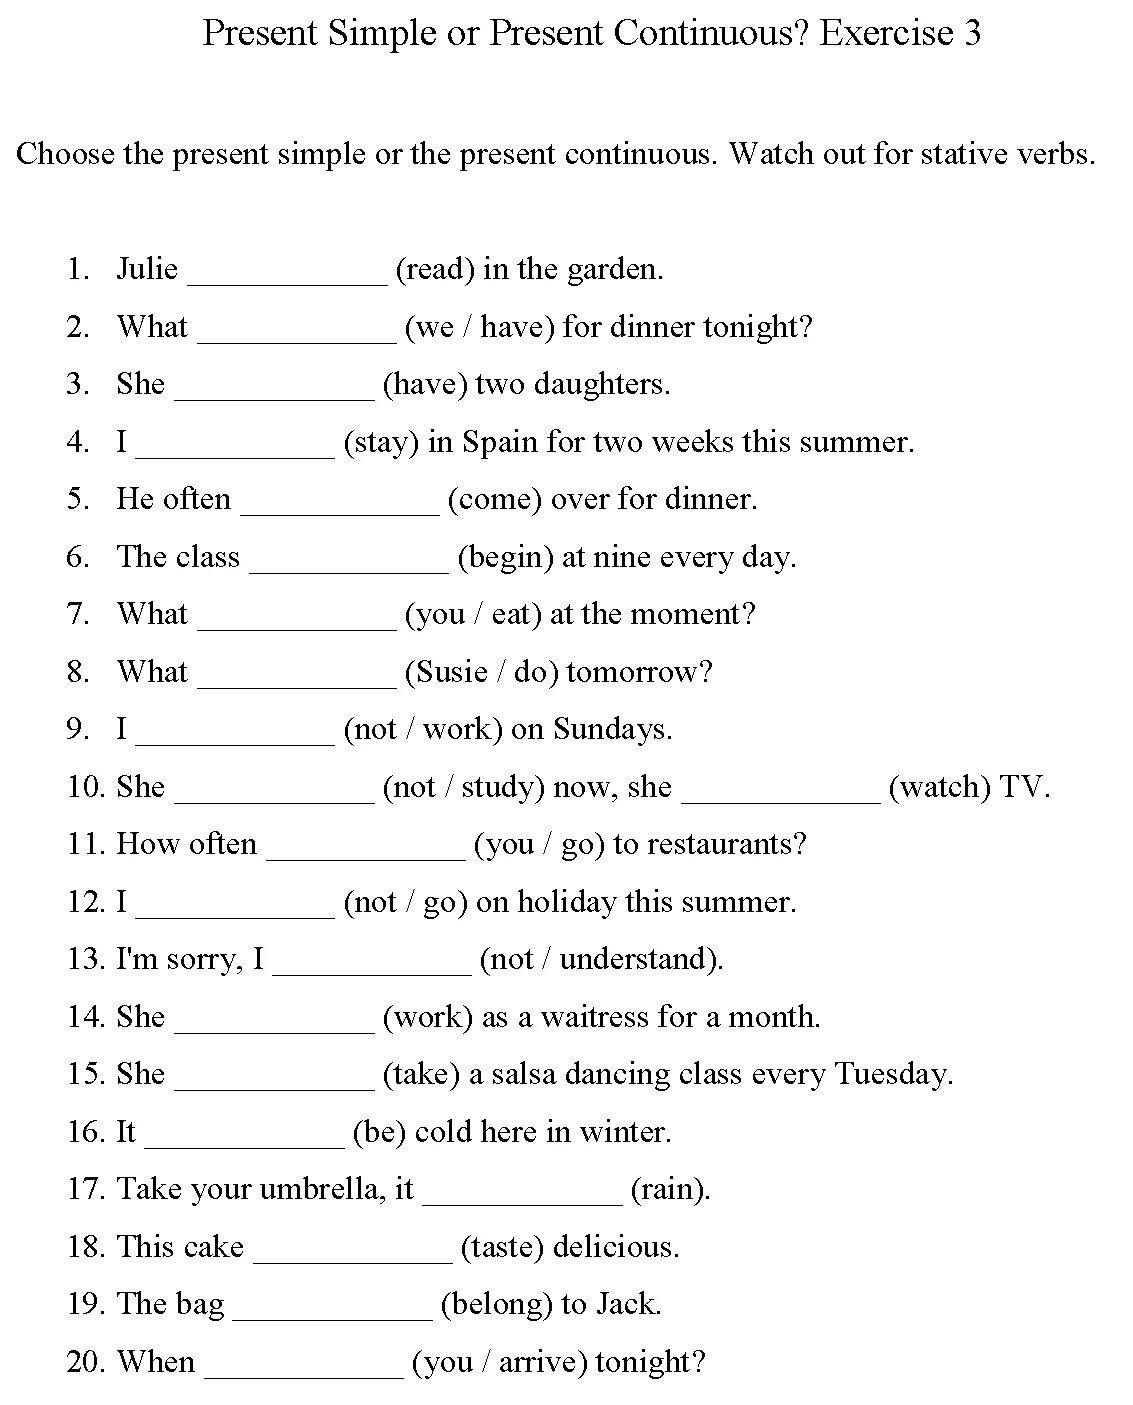 Present simple present continuous past simple exercise. Present simple present Continuous упражнения 6 класс Worksheet. Английский язык present simple и present Continuous упражнения. Present simple present Continuous тест pdf. Present simple present Continuous упражнения 3 класс Worksheet.